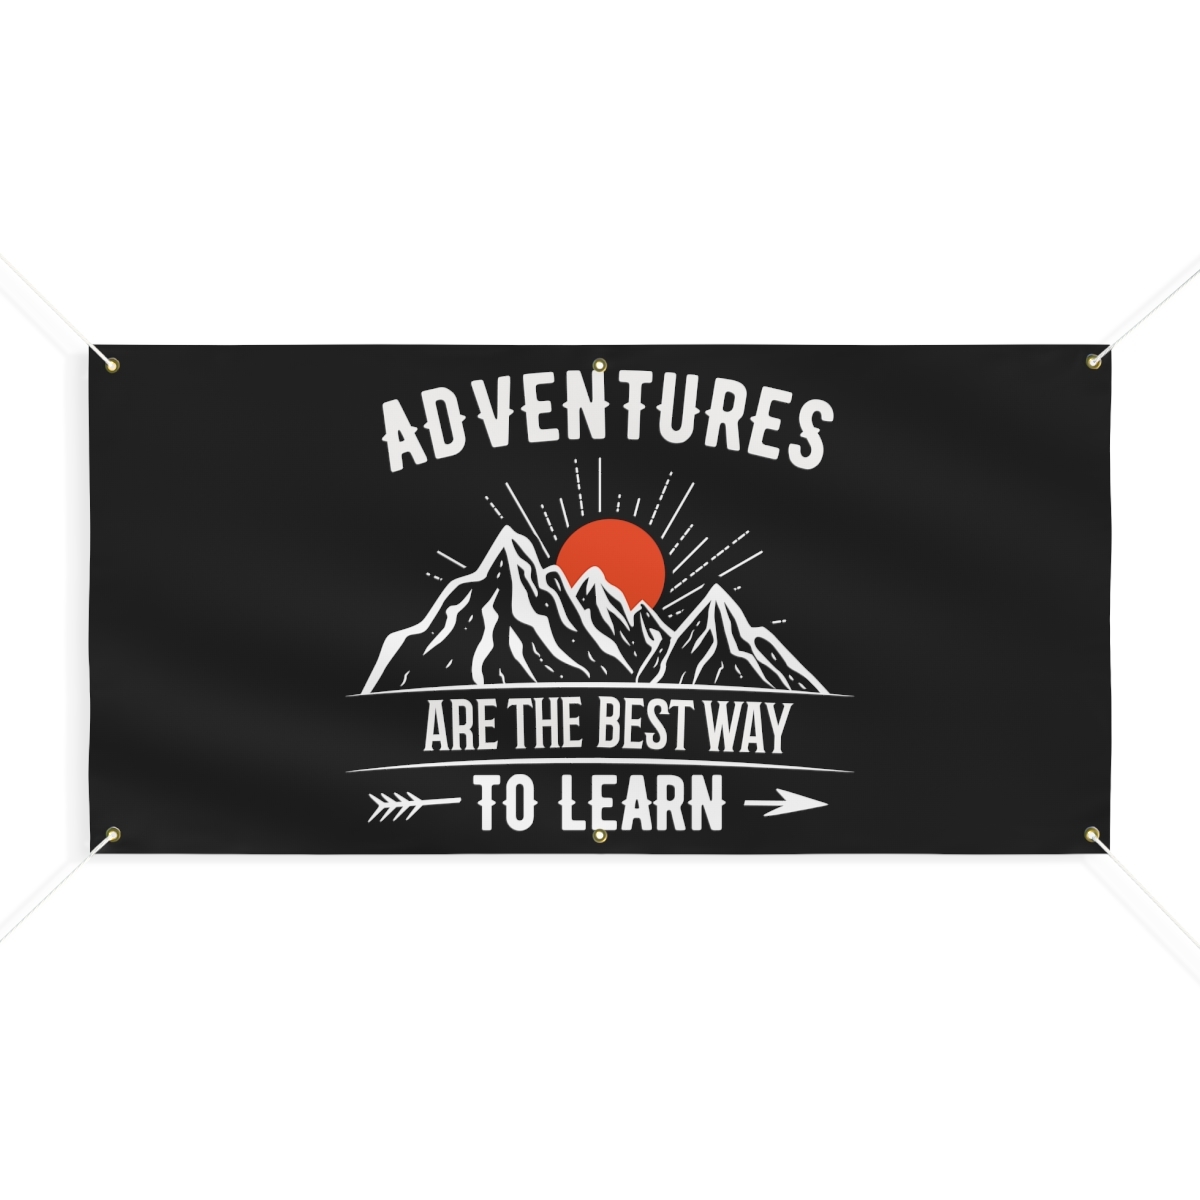 Primary image for Personalized Vinyl Motivational Quote Banner "Adventures Are the Best Way to Lea